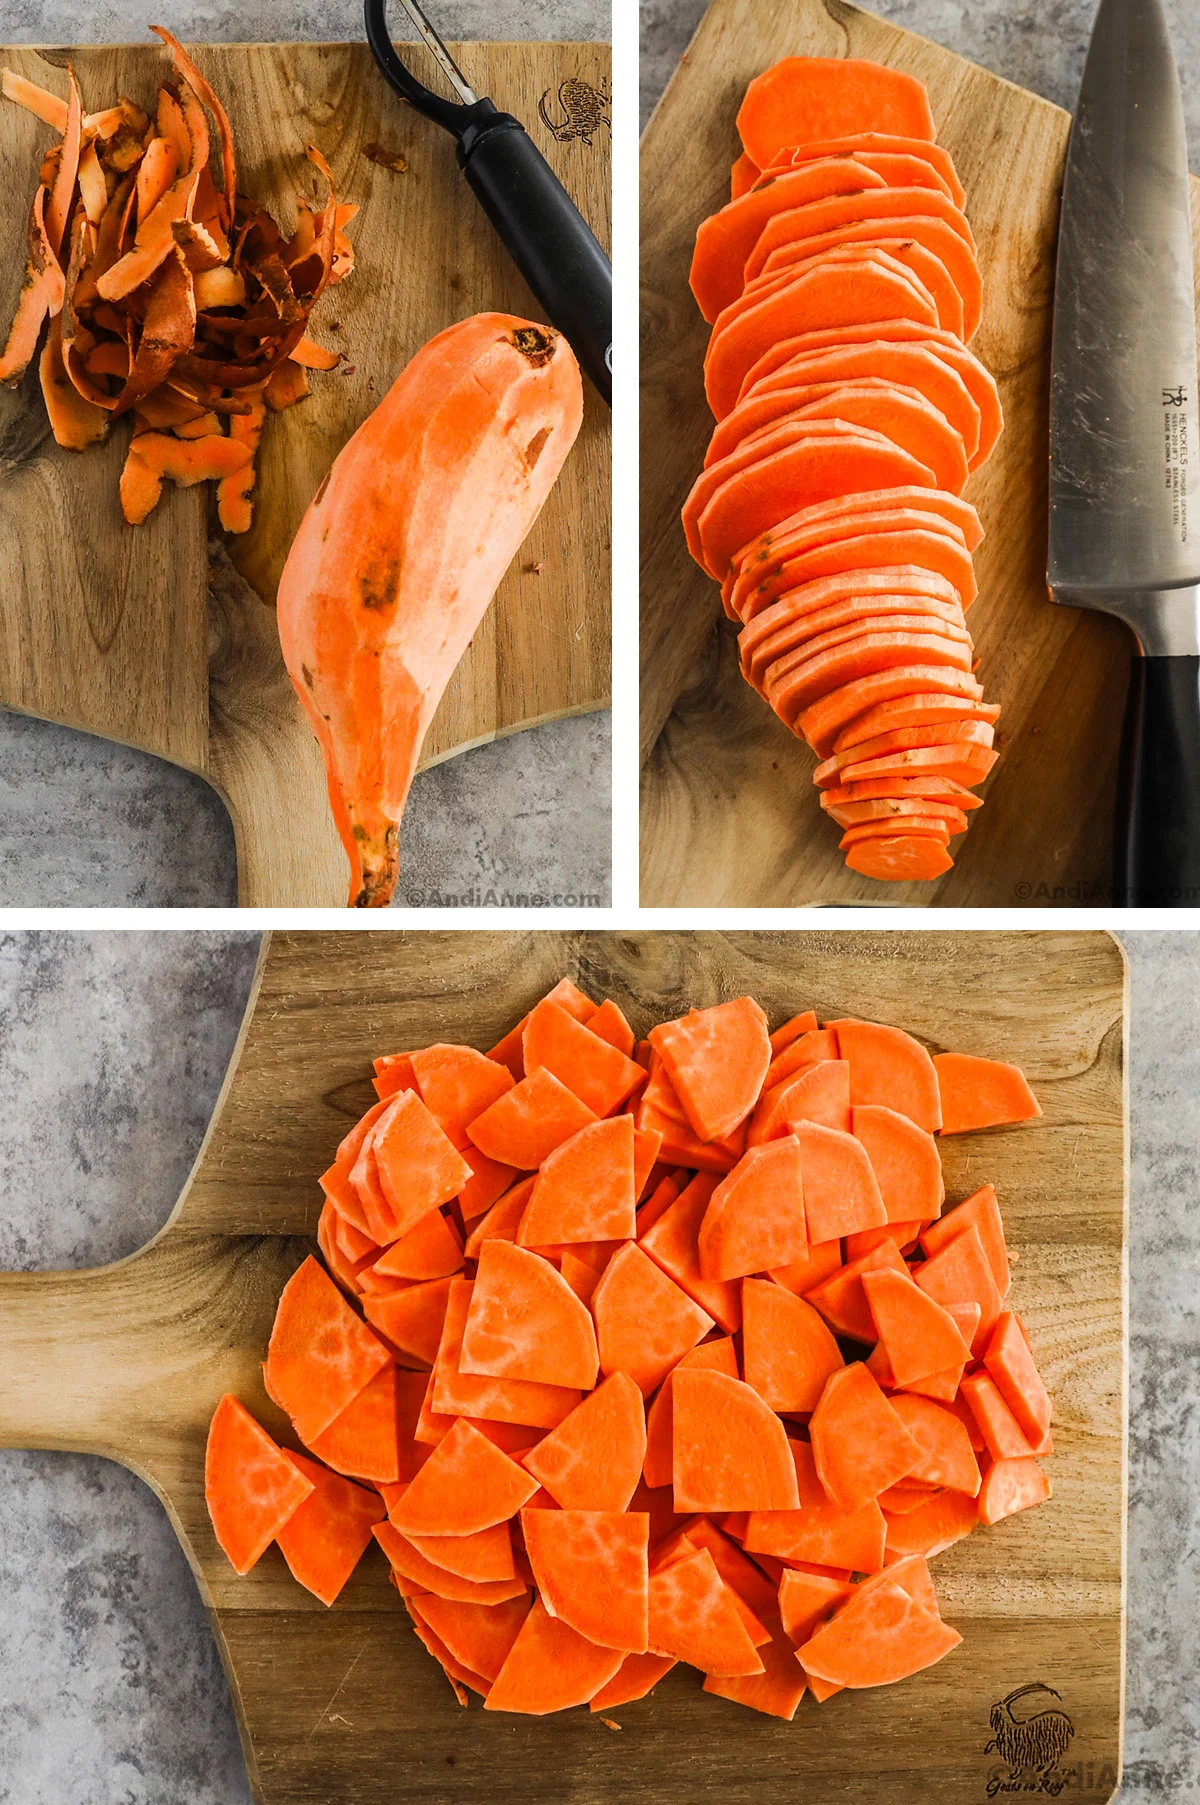 Four images of sweet potato, first peeled but whole, second sliced thin, third, sliced into quarters.